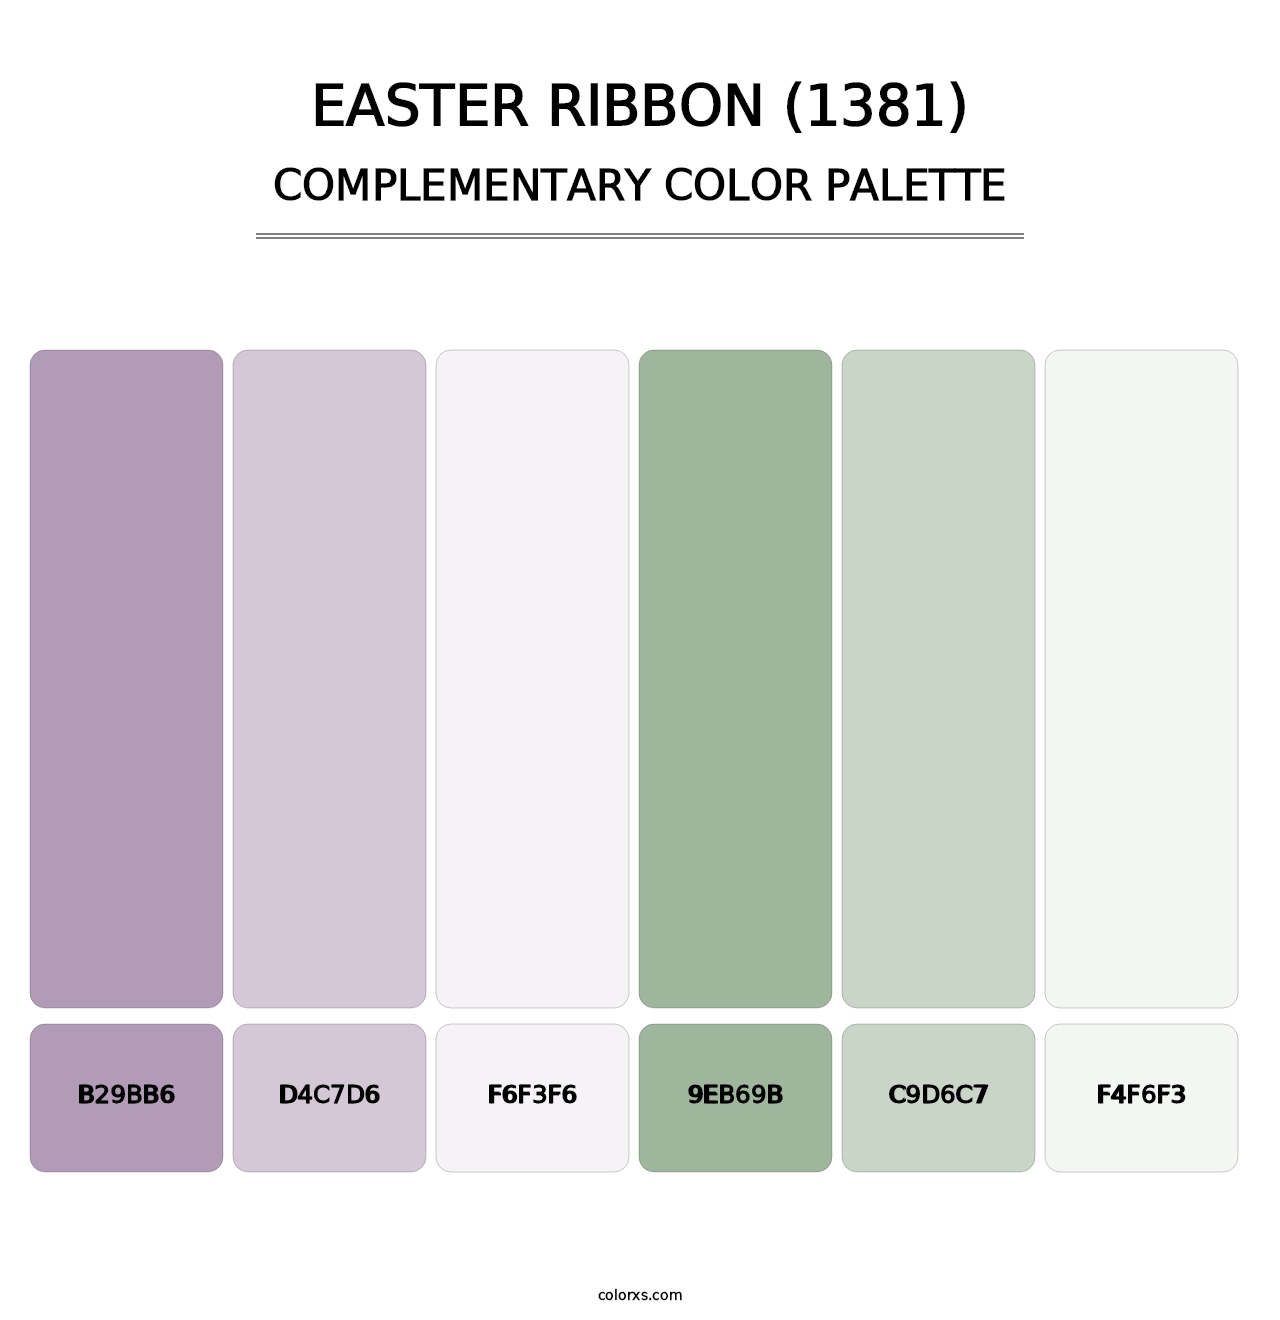 Easter Ribbon (1381) - Complementary Color Palette